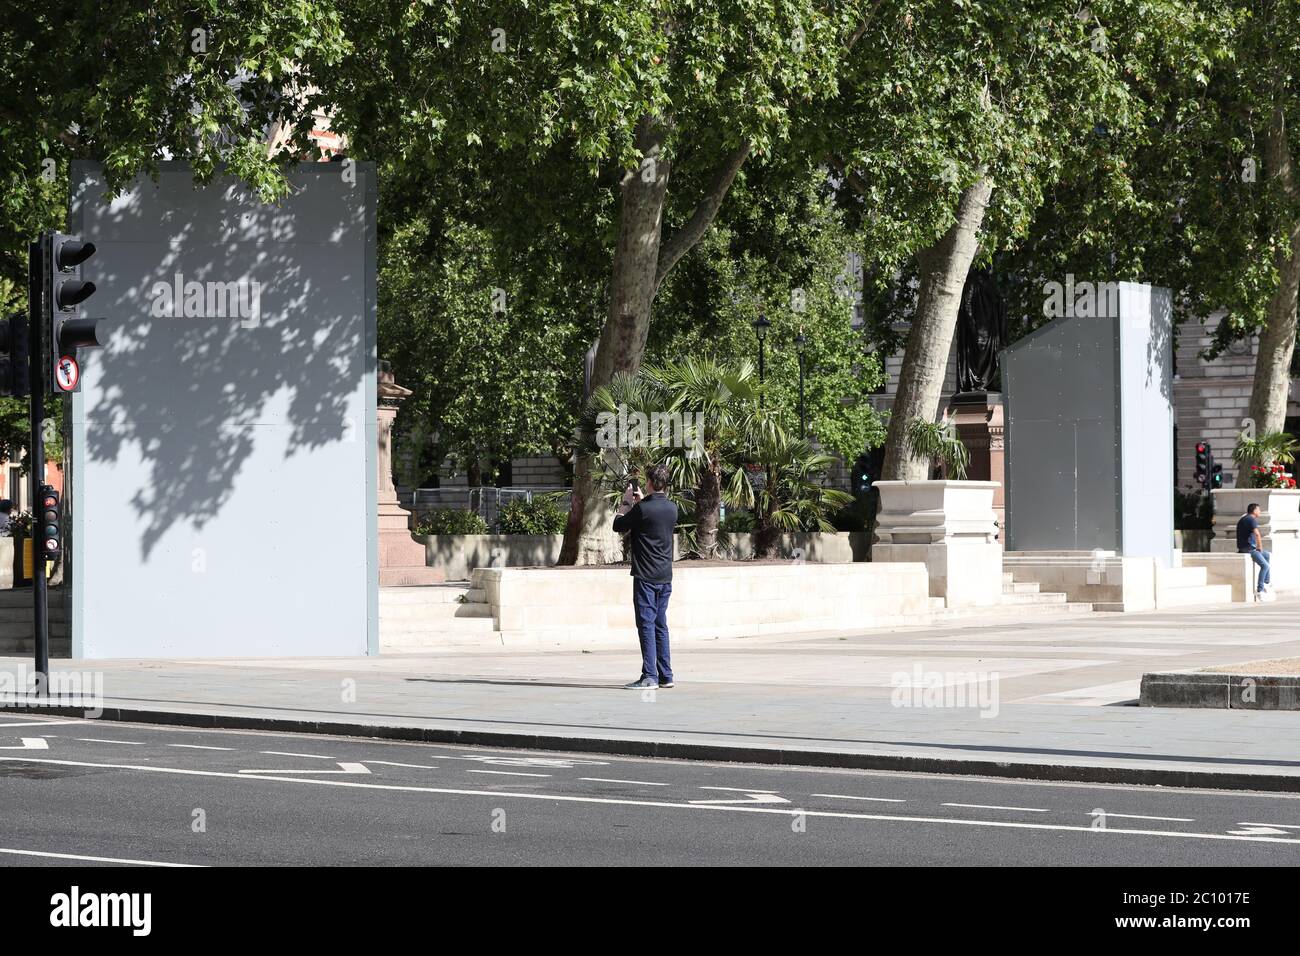 A boarded up Nelson Mandela statue (left) and Mahatma Gandhi statue (right) on Parliament Square, London before a possible protest by the Democratic football Lads Alliance against a Black Lives Matter protest. Stock Photo